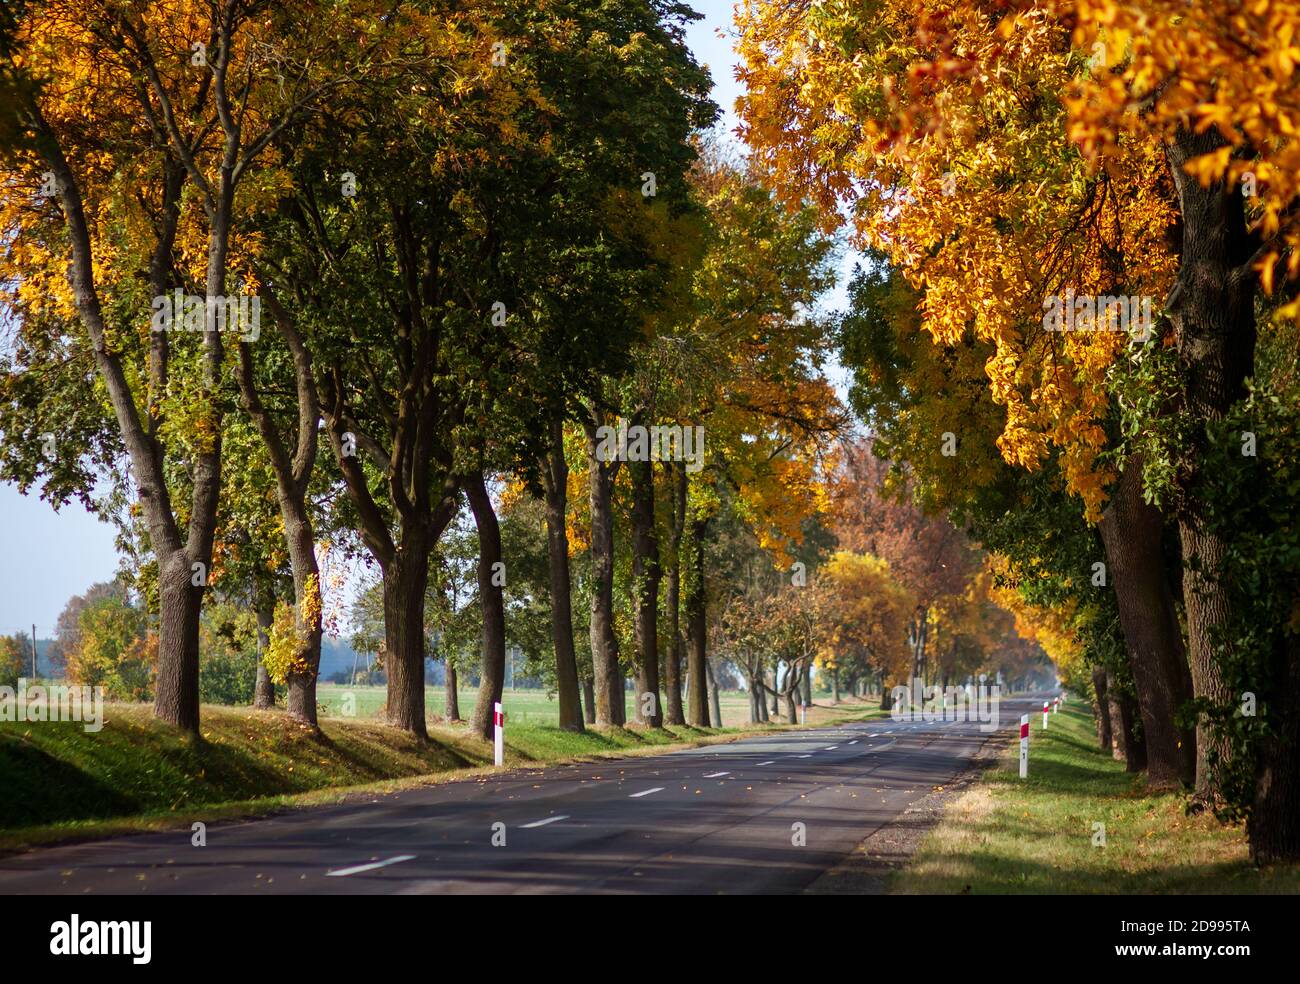 Paved asphalt road goes through forest with autumn trees in rural locality with concrete bollards. Sunny clear cloudless day without people and cars Stock Photo